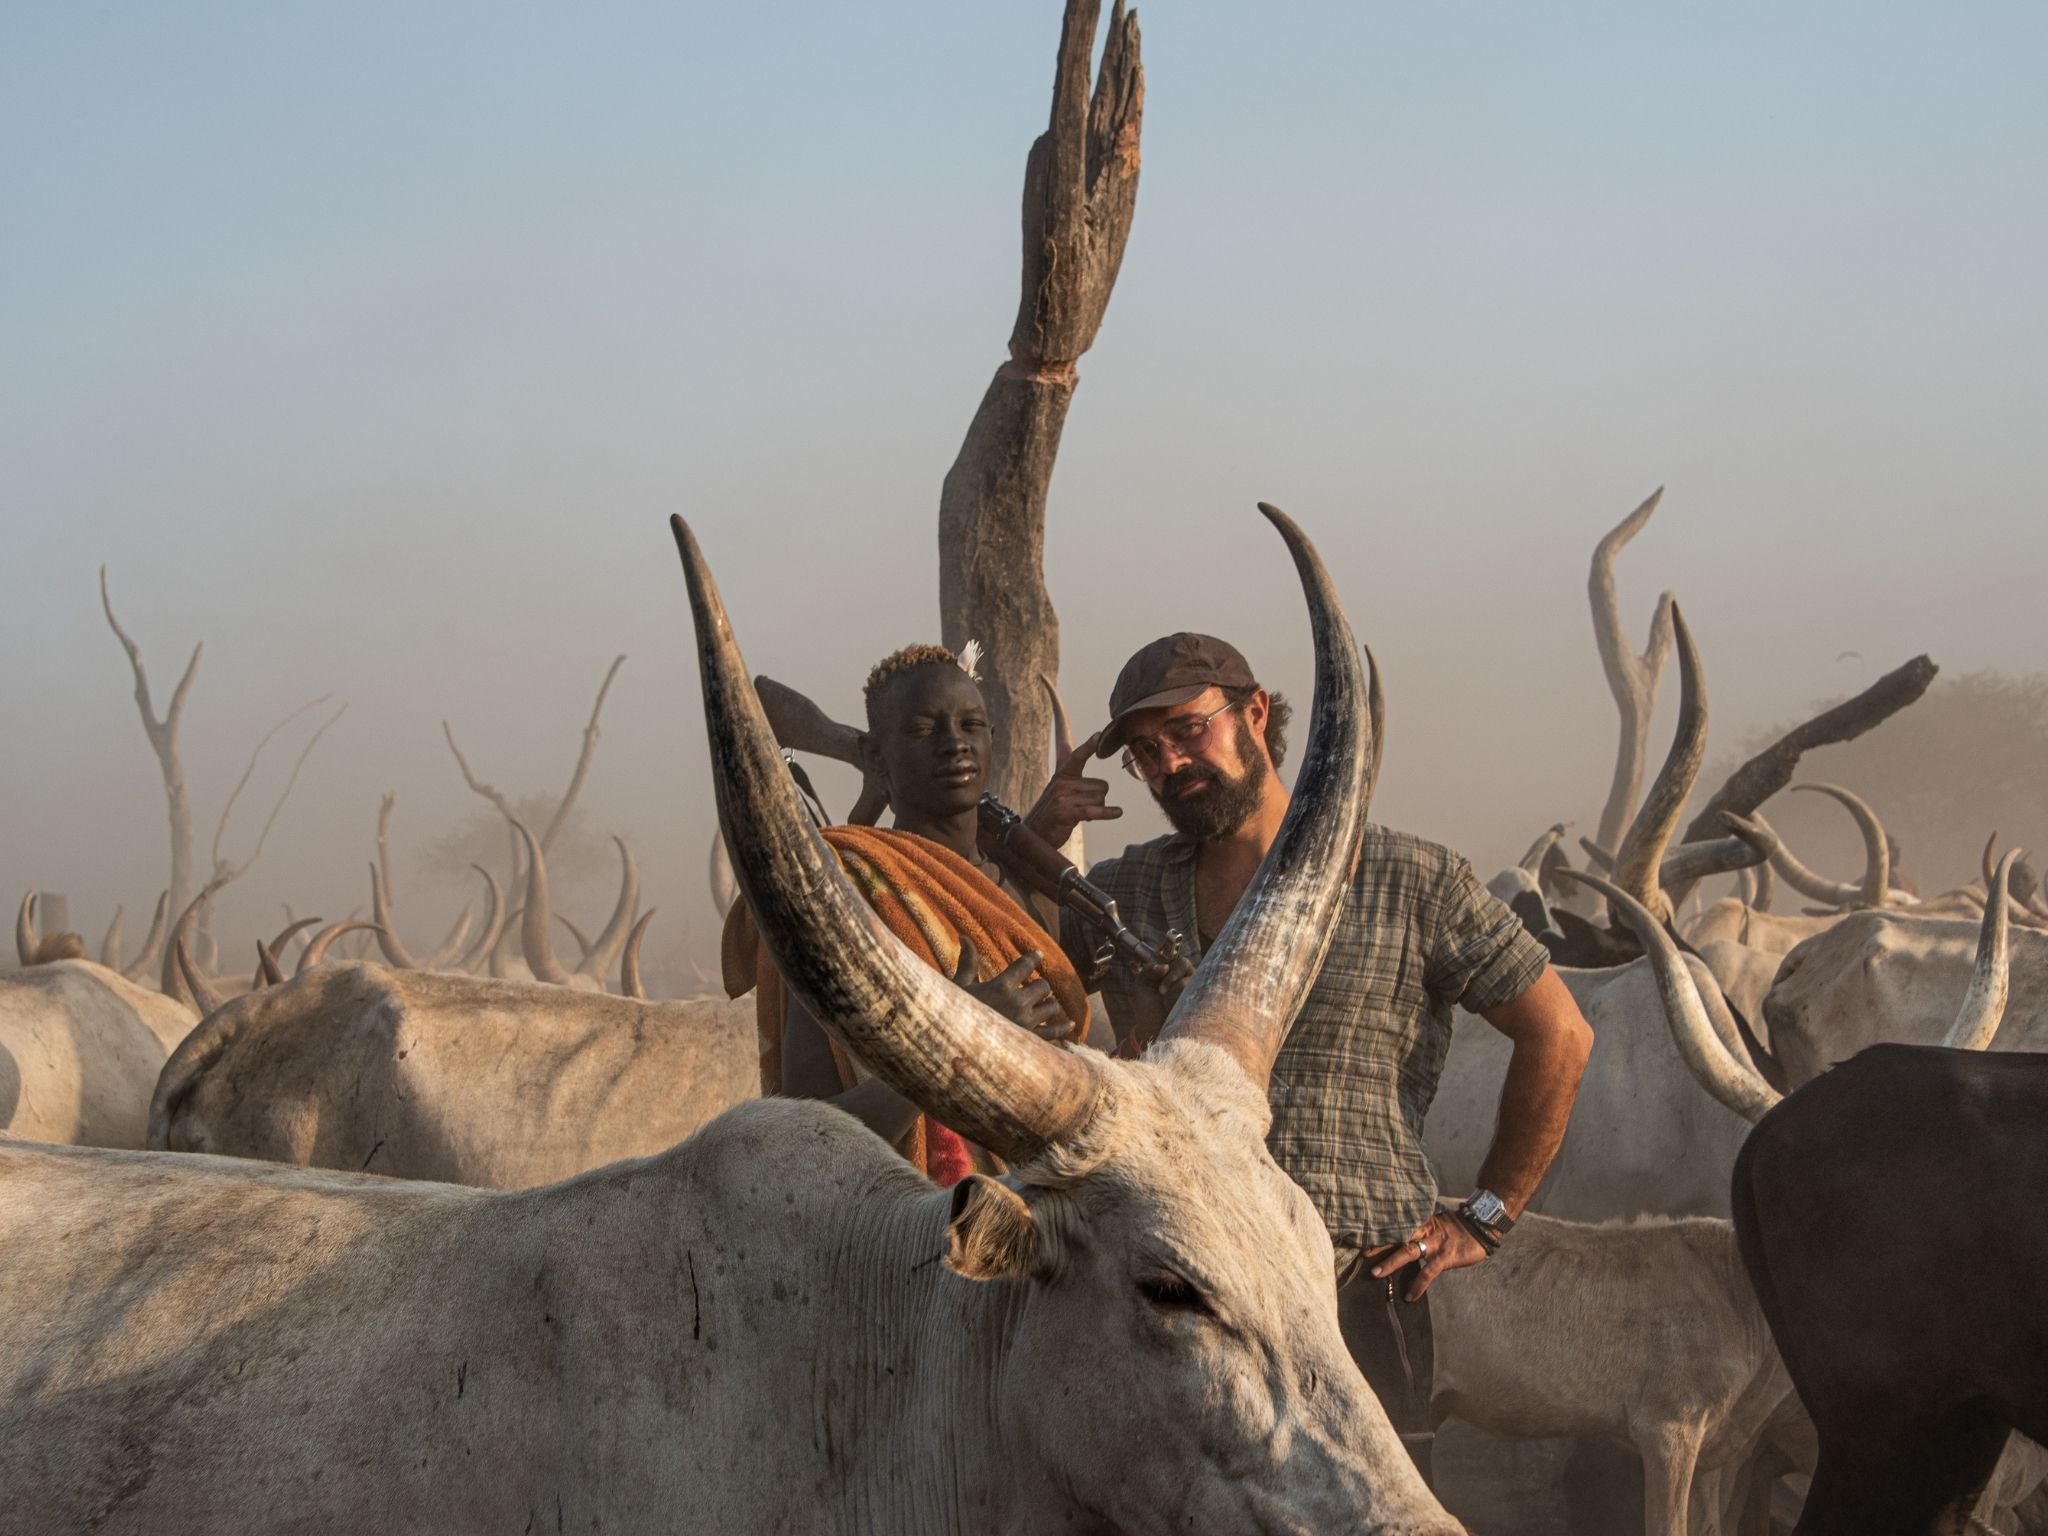 Independent shareholder Evgeny Lebedev meets a herder at a cattle camp in South Sudan